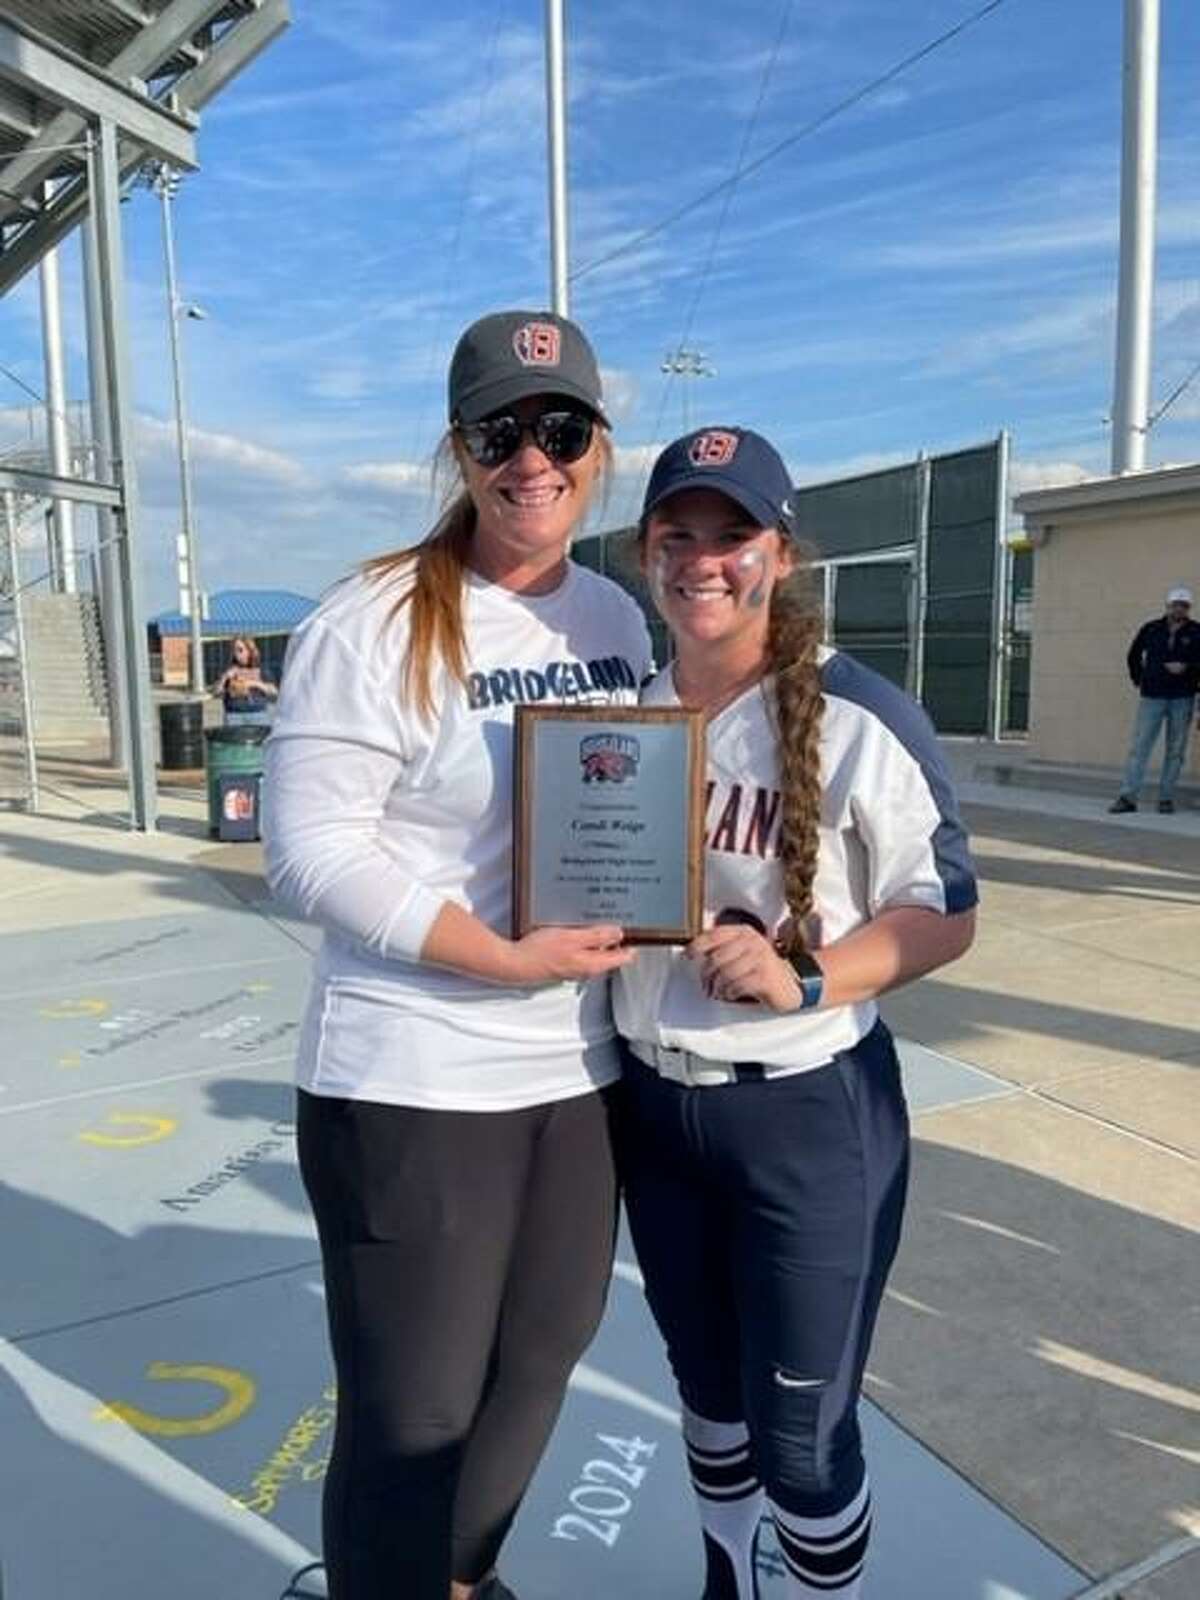 Bridgeland head coach Candi Weige earned her 200th career win after the Lady Bears went 2-0 on day one of the Cy-Fair Varsity Tournament on Thursday, March 3. Pitcher Makenzi Jenkins, holding the plaque, helped with 78 of those wins.